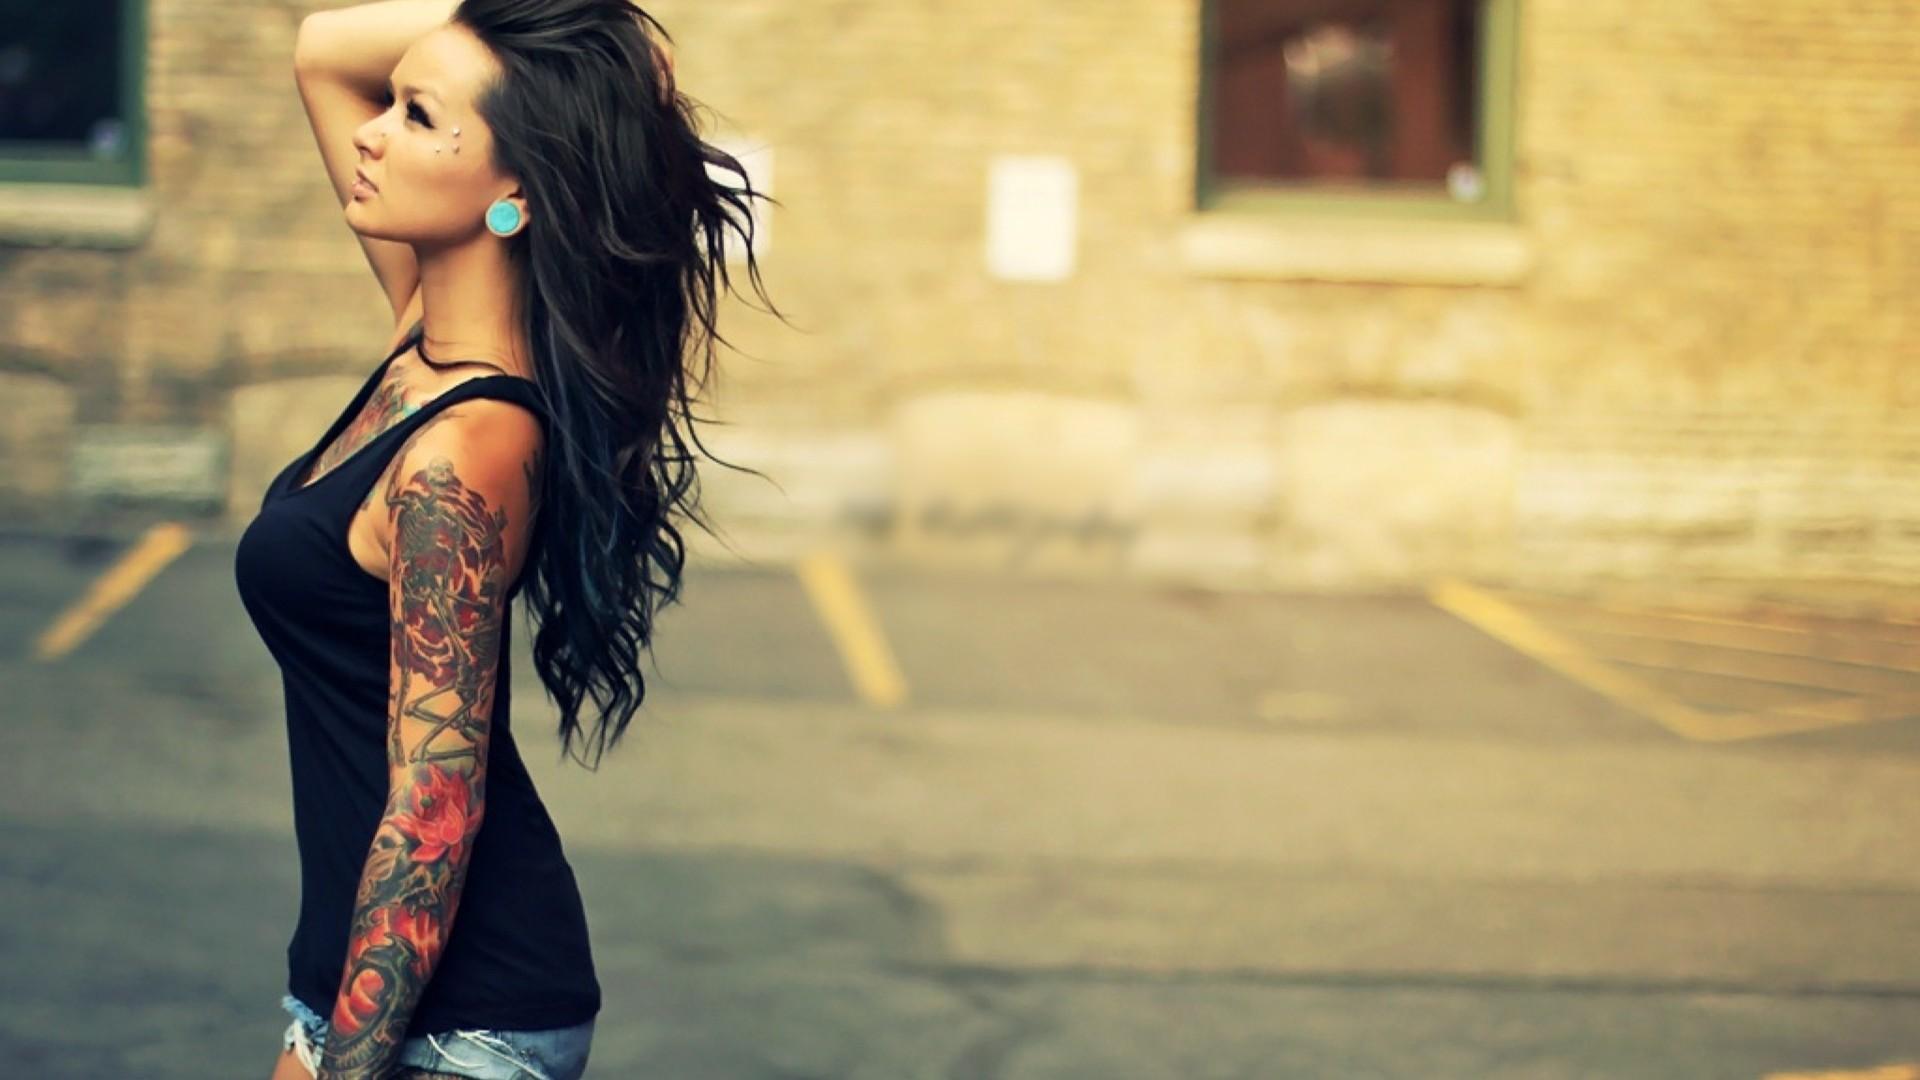 Tattoo Girl Wallpapers High Quality